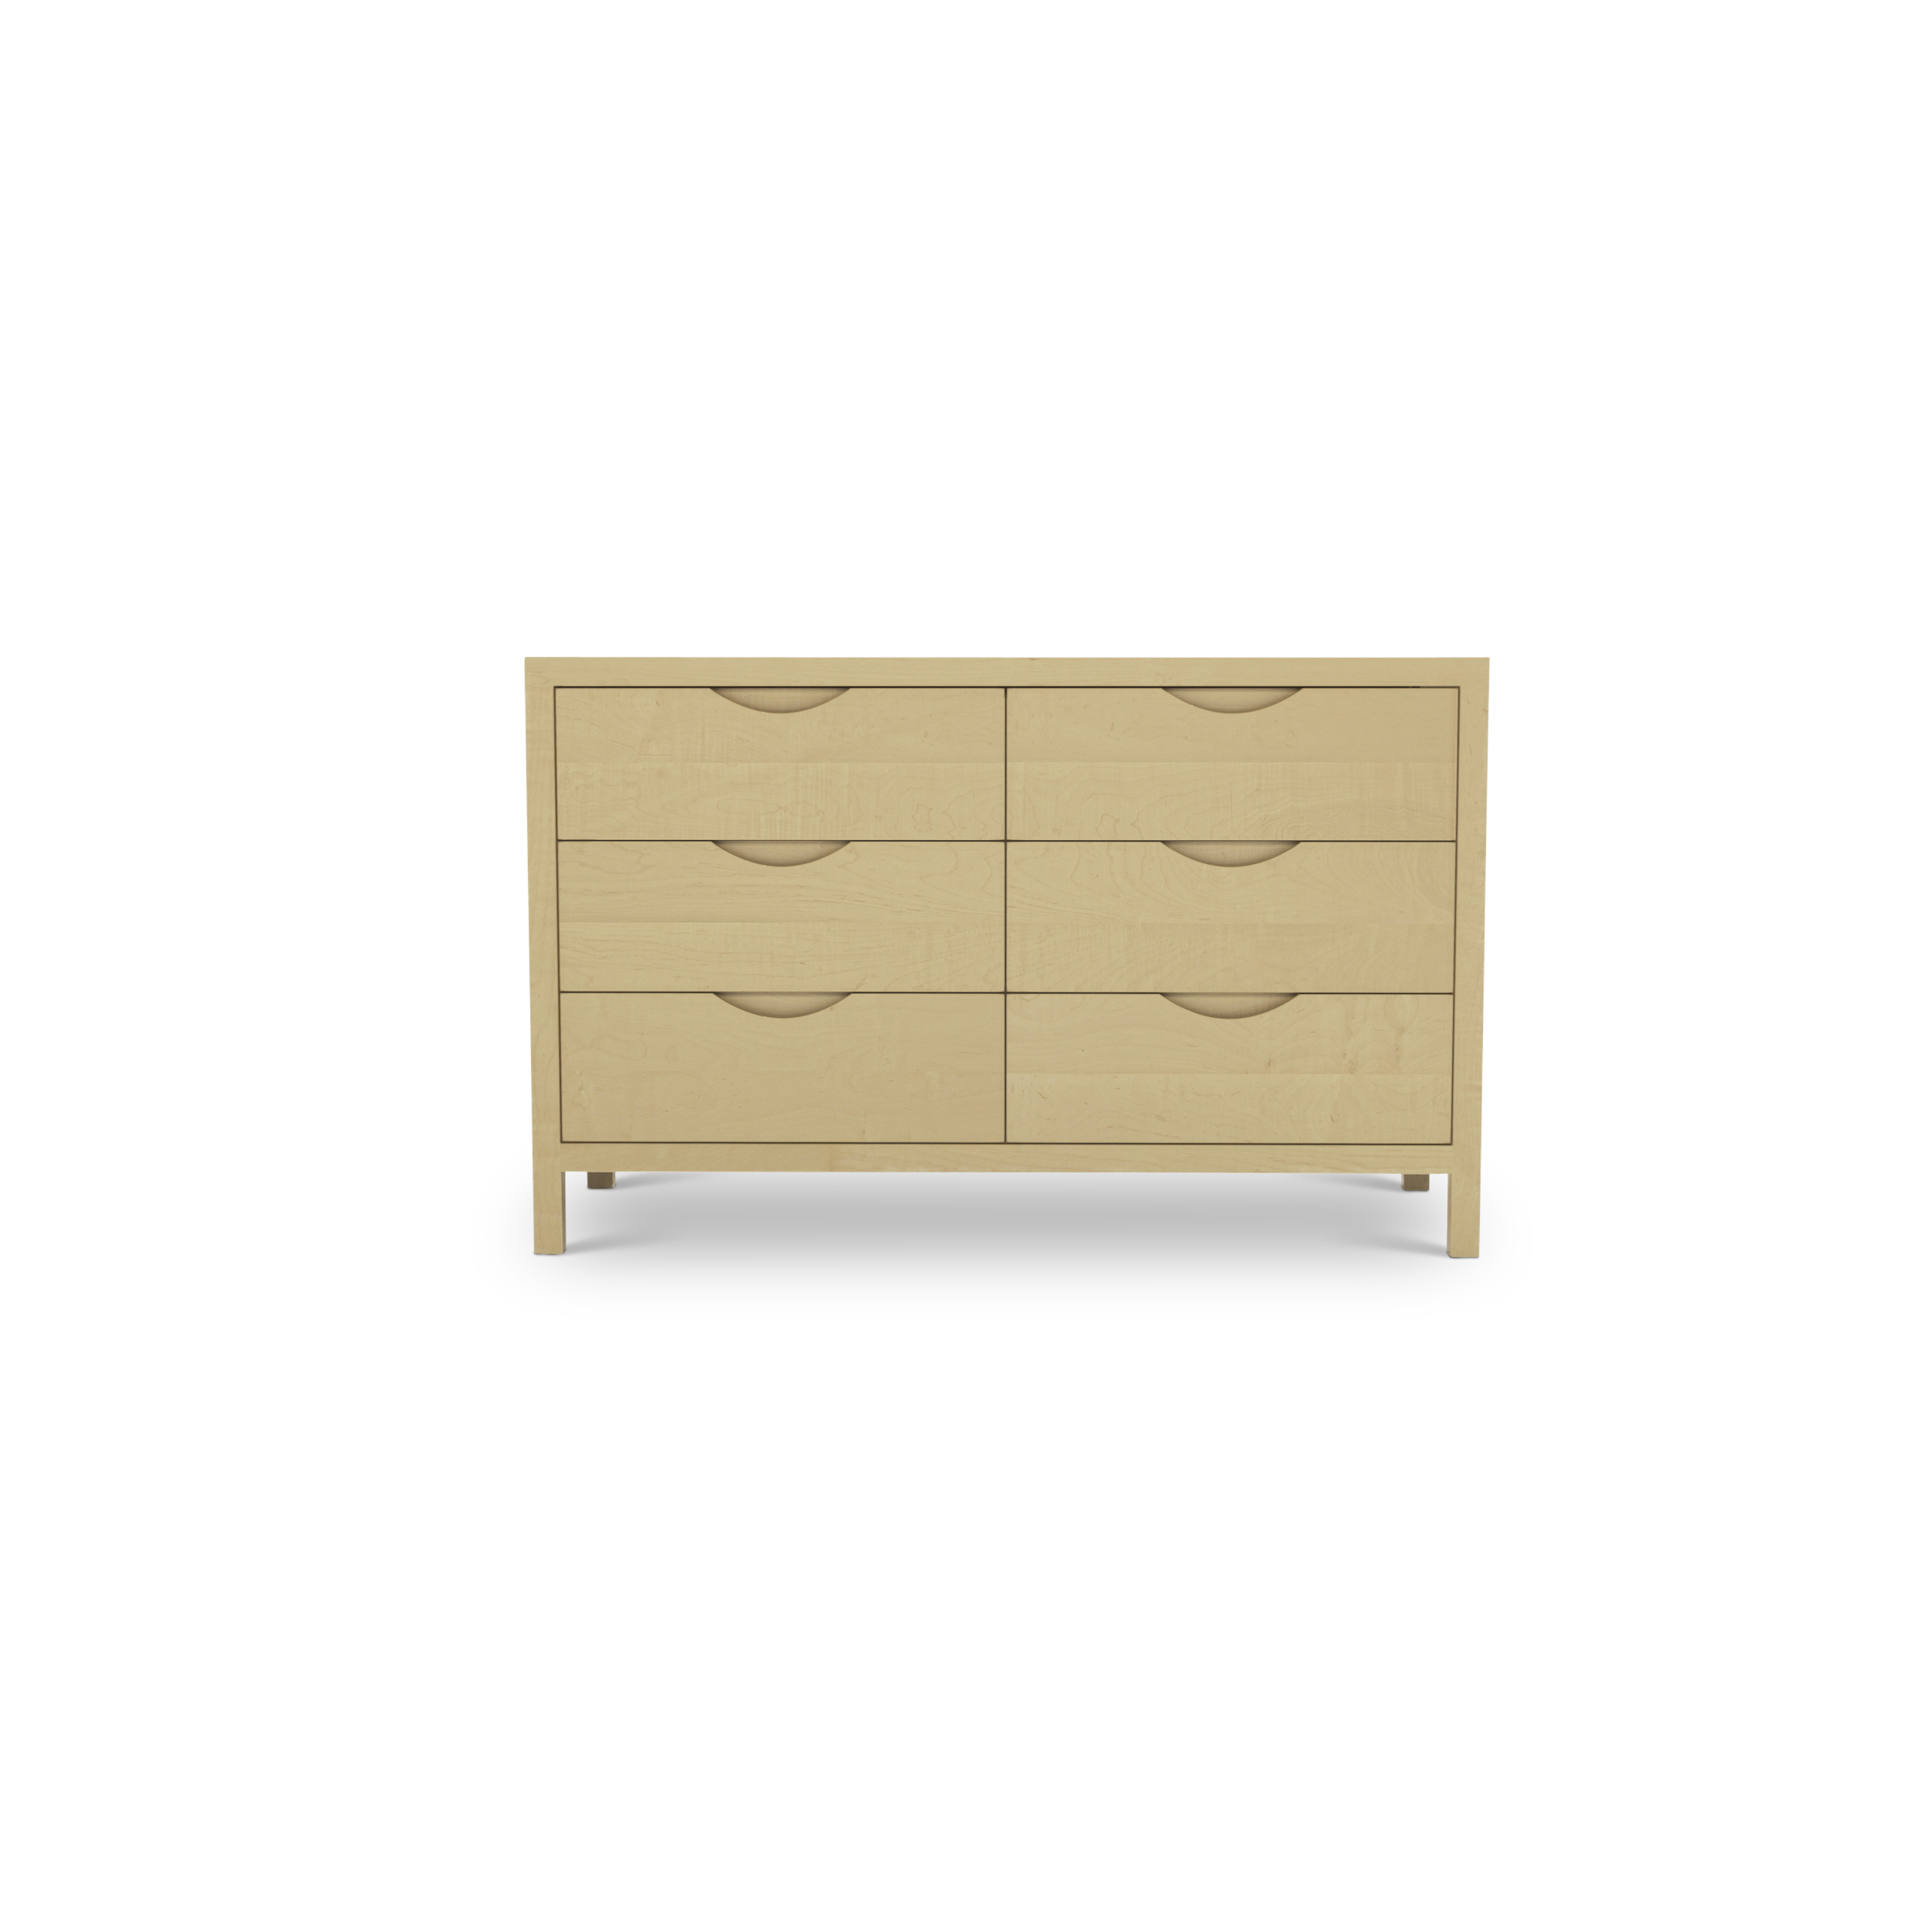 Series 353 Dresser With Six Drawers At 48″ In Width